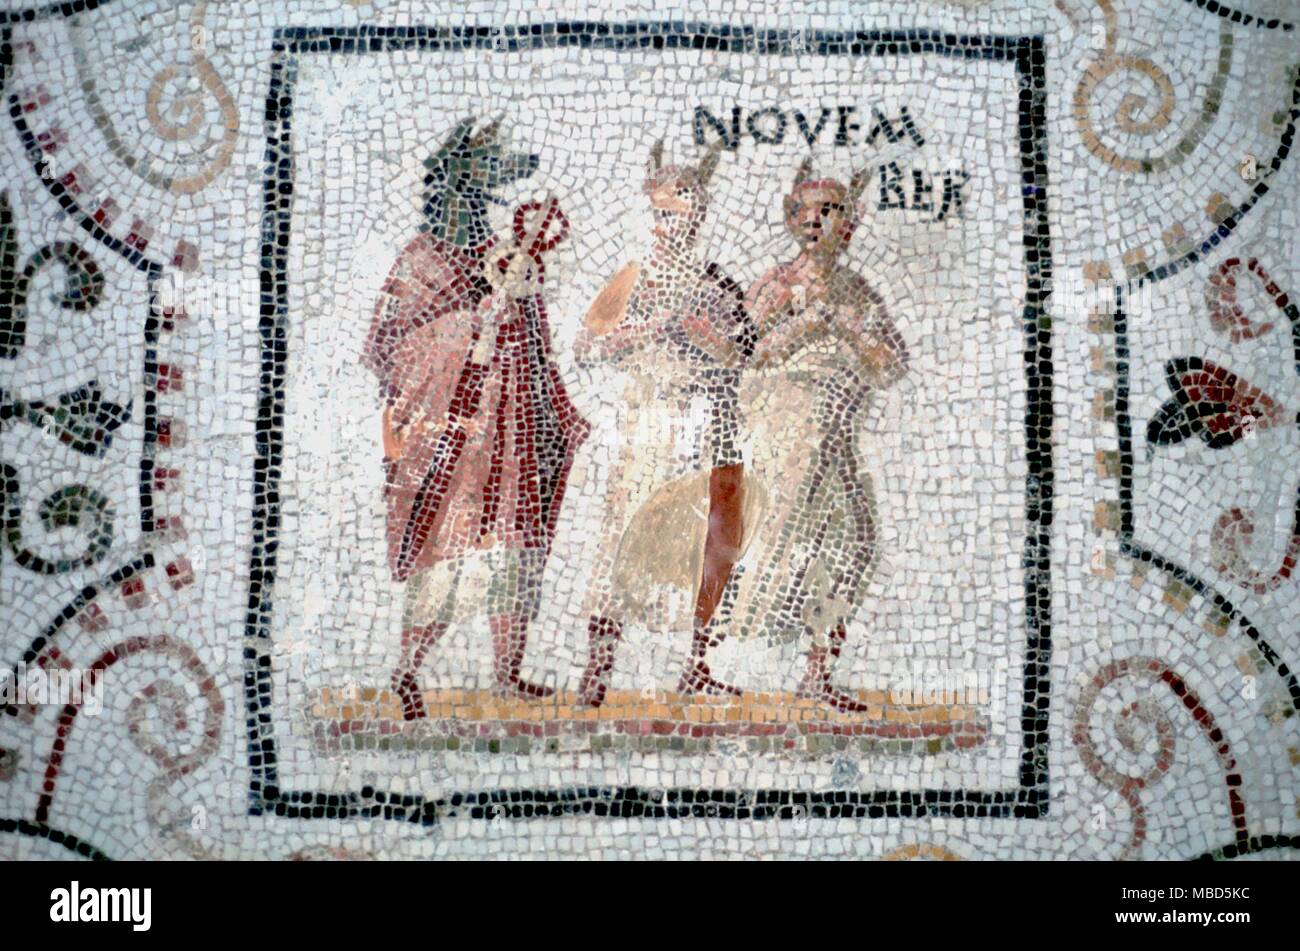 Seasons - November. Detail of dog-headed Mercury as symbol of November. Mosaic of the Roman period (c.3rd century A.D.), formerly at Thrysdus, now in the Sousse Museum, Tunisia. Stock Photo